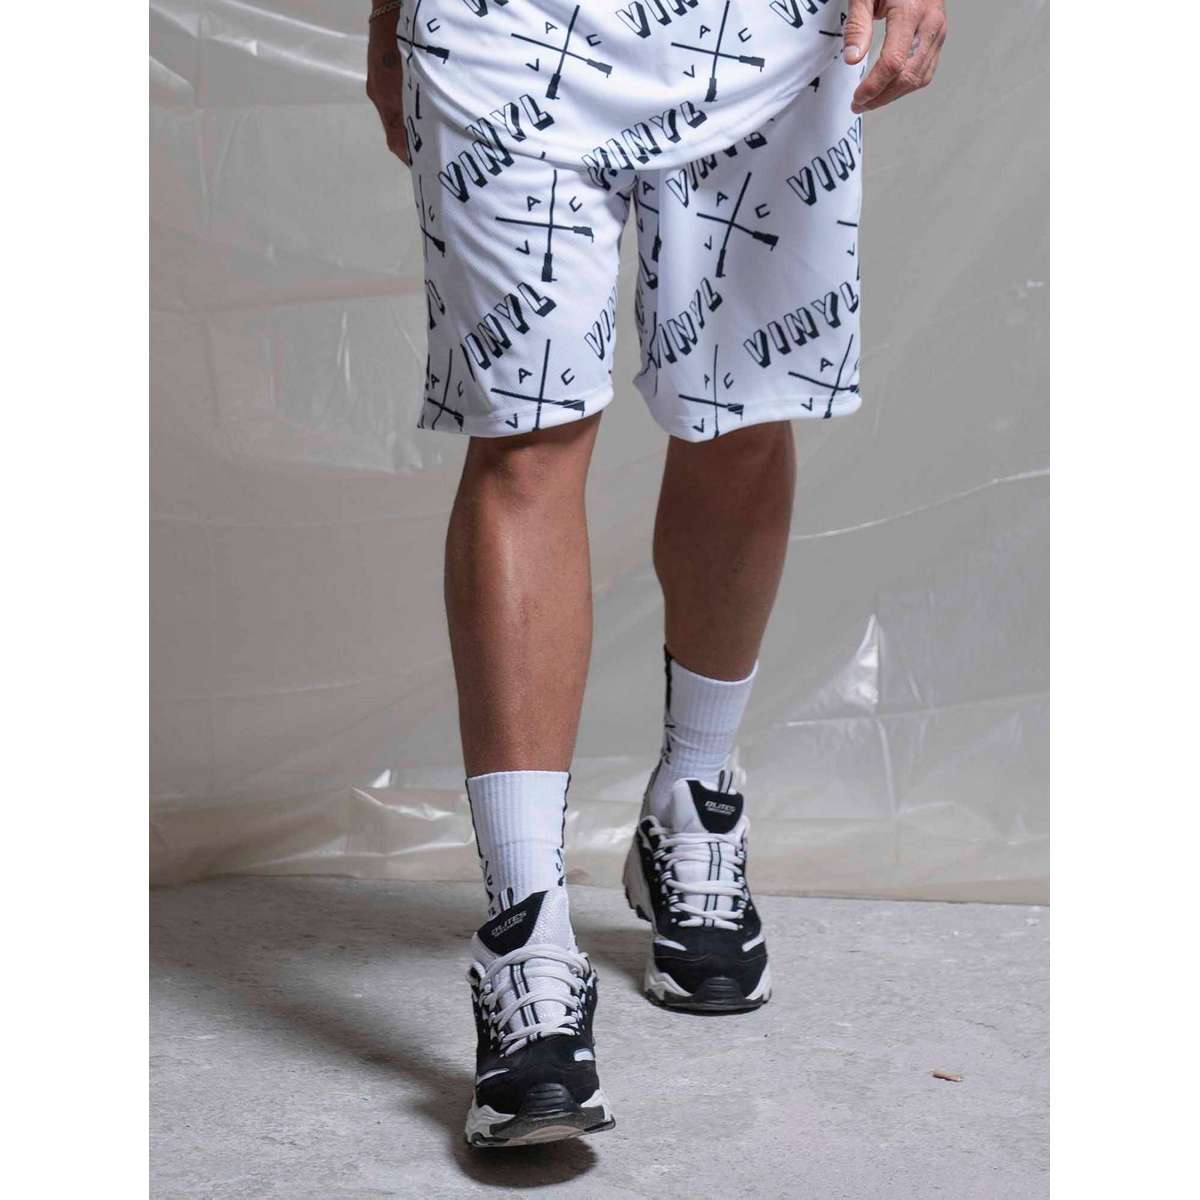 VINYL ART CLOTHING ALL OVER PRINTED SHORTS 02841-02